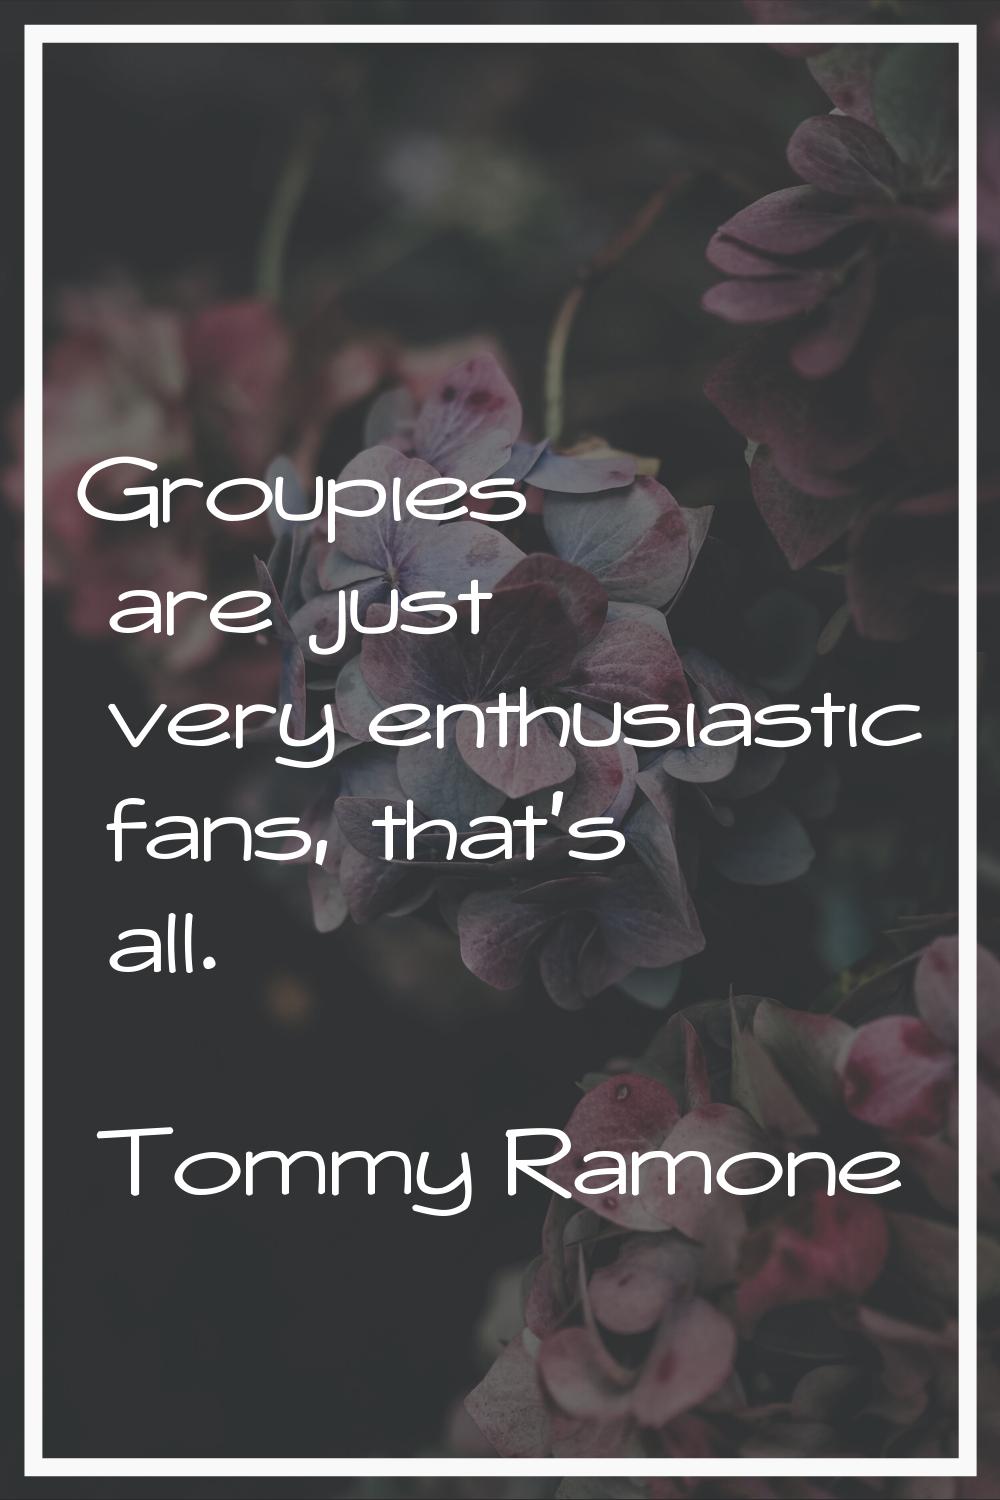 Groupies are just very enthusiastic fans, that's all.